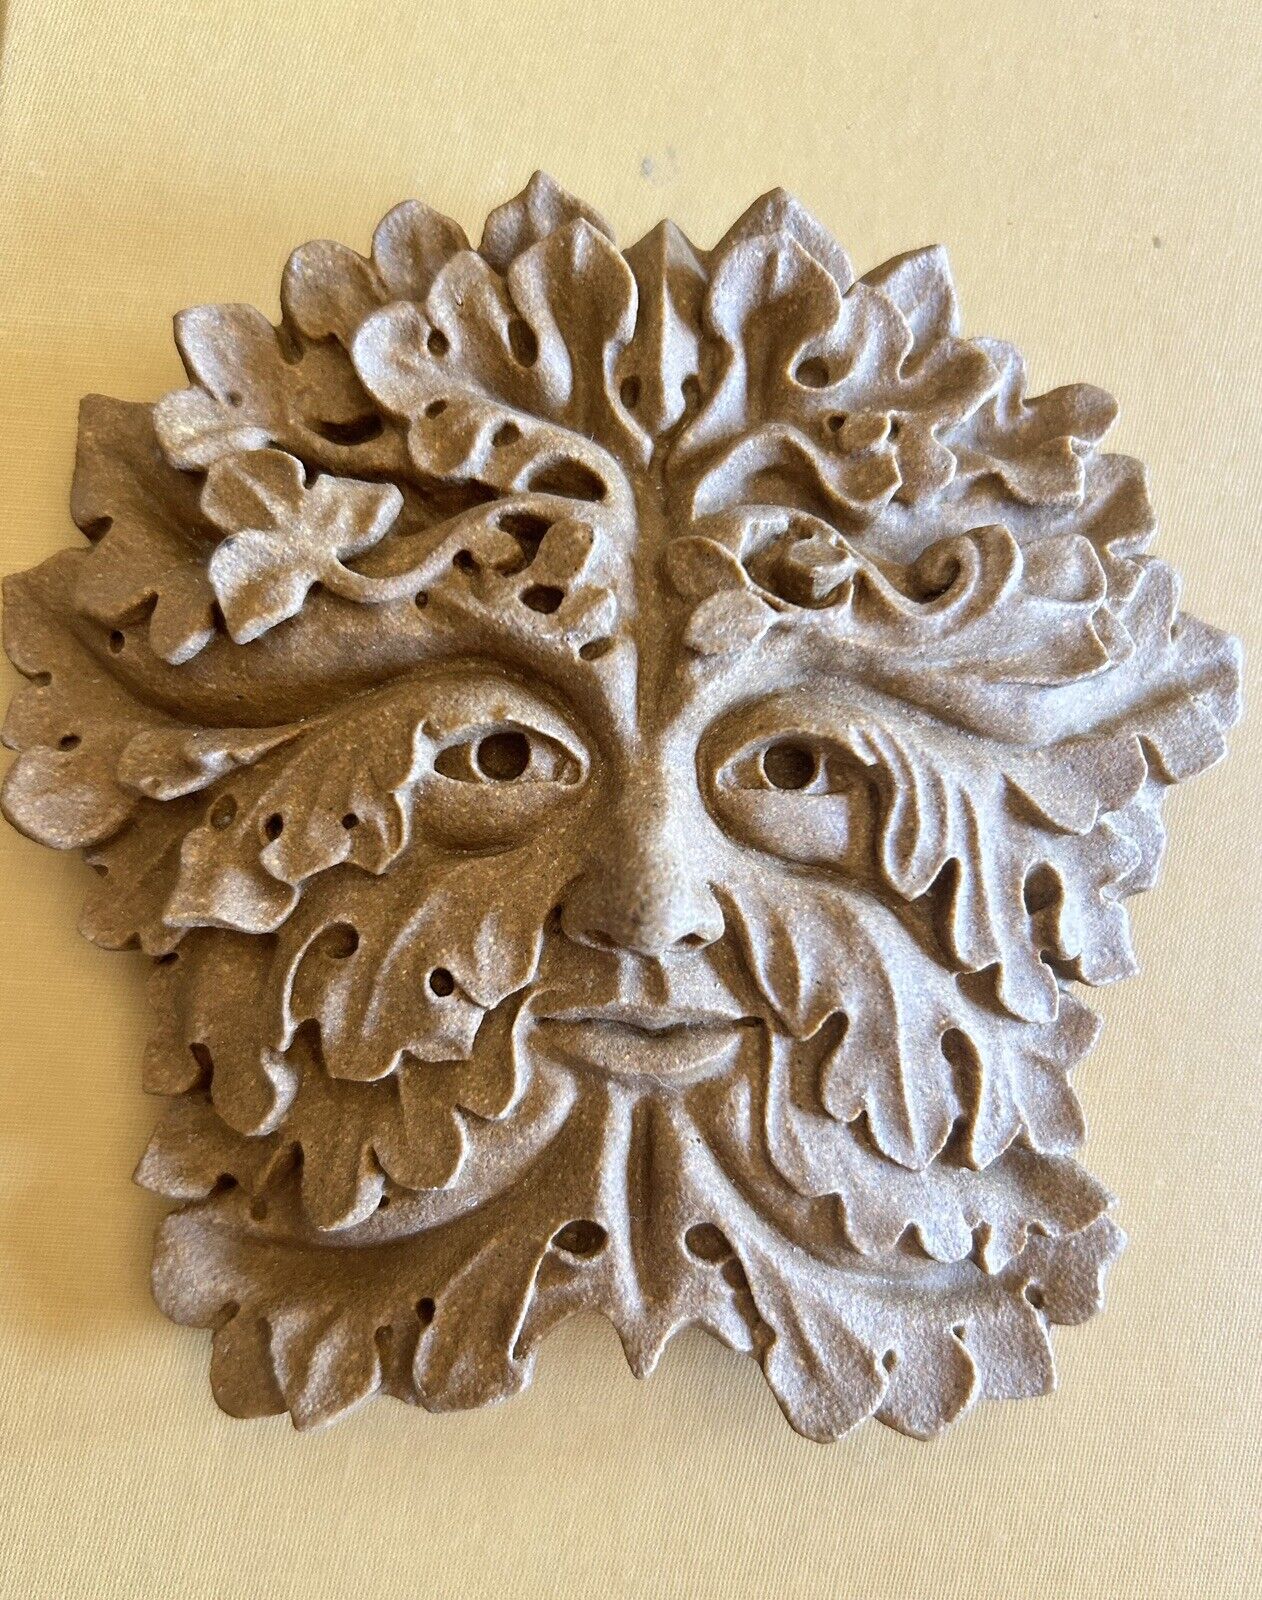 DAVID LAWRENCE FROM THE GREENWOOD A Mans Face with Leaves. #4 Art Wall Hanging